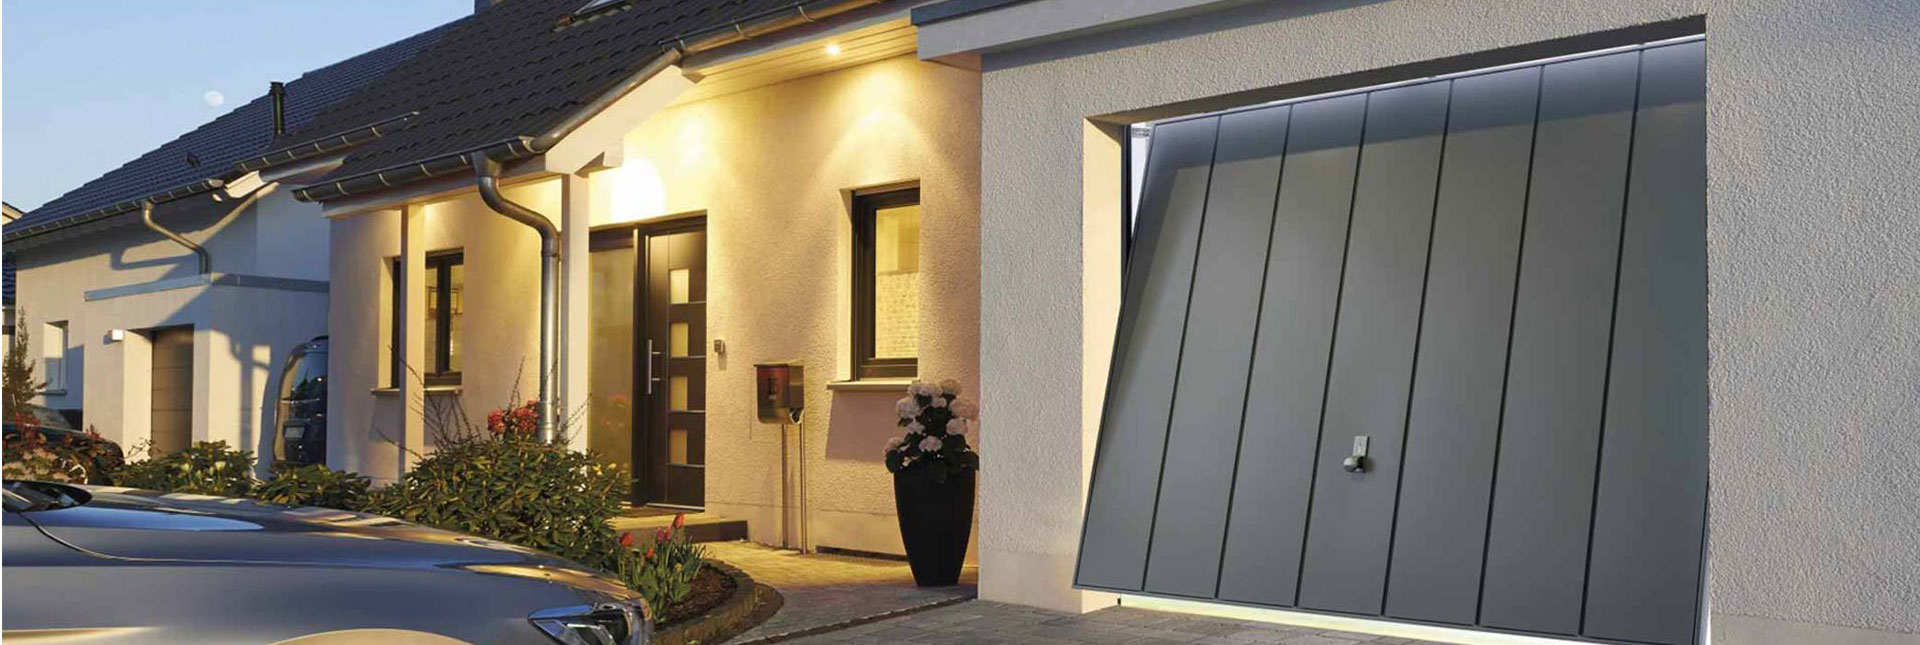 21Q&A: Which garage door type offers the best security?